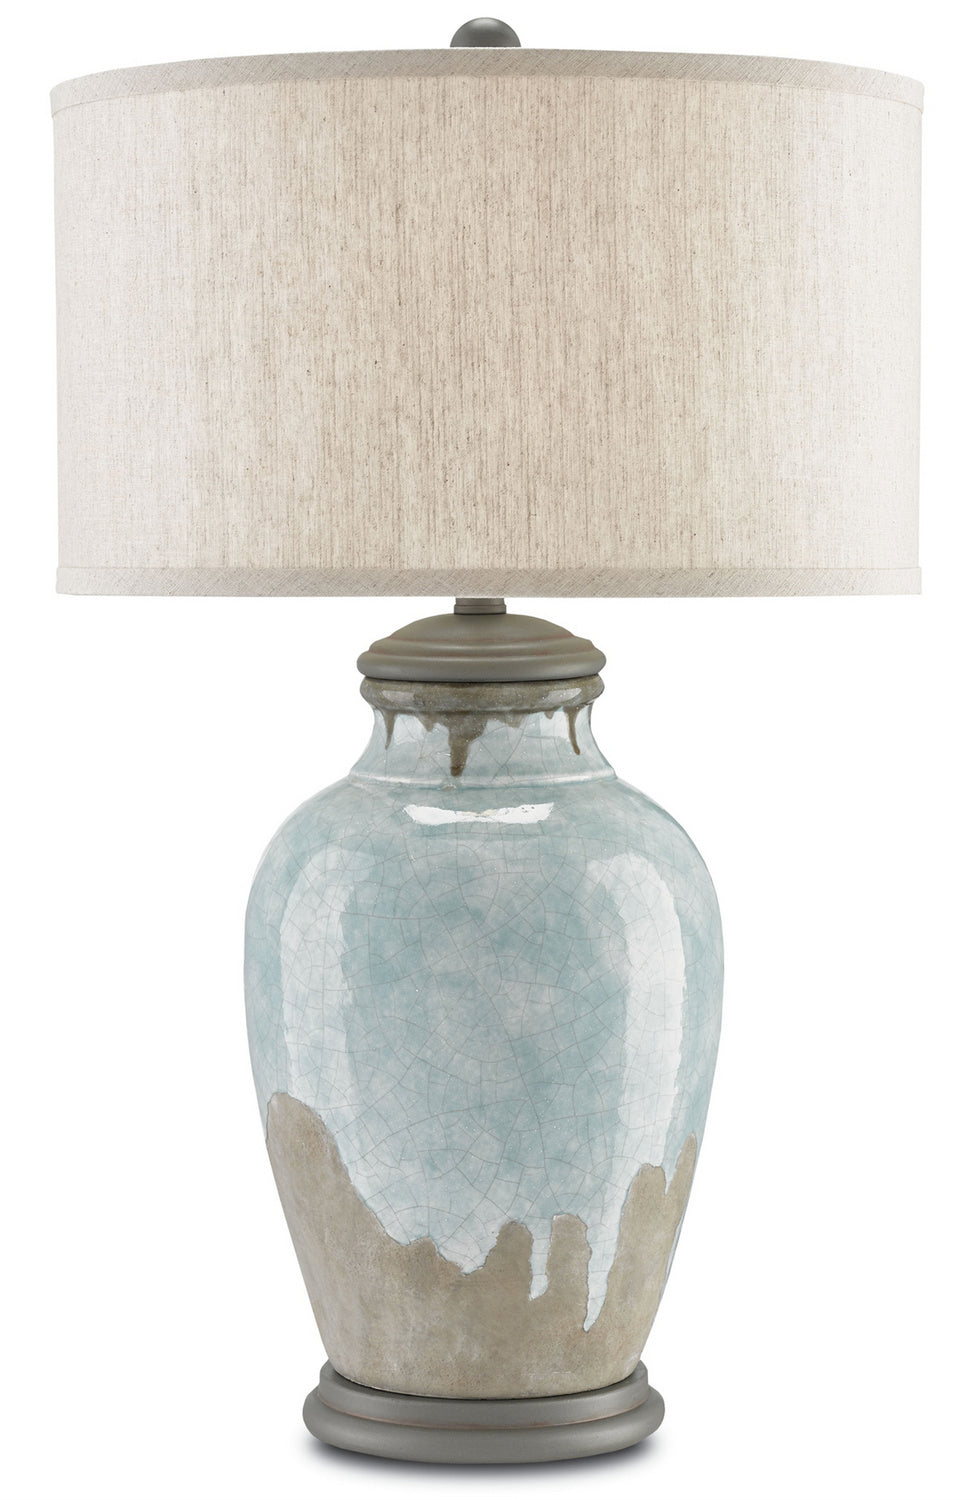 One Light Table Lamp from the Chatswood collection in Blue-Green/Gray/Hiroshi Gray finish